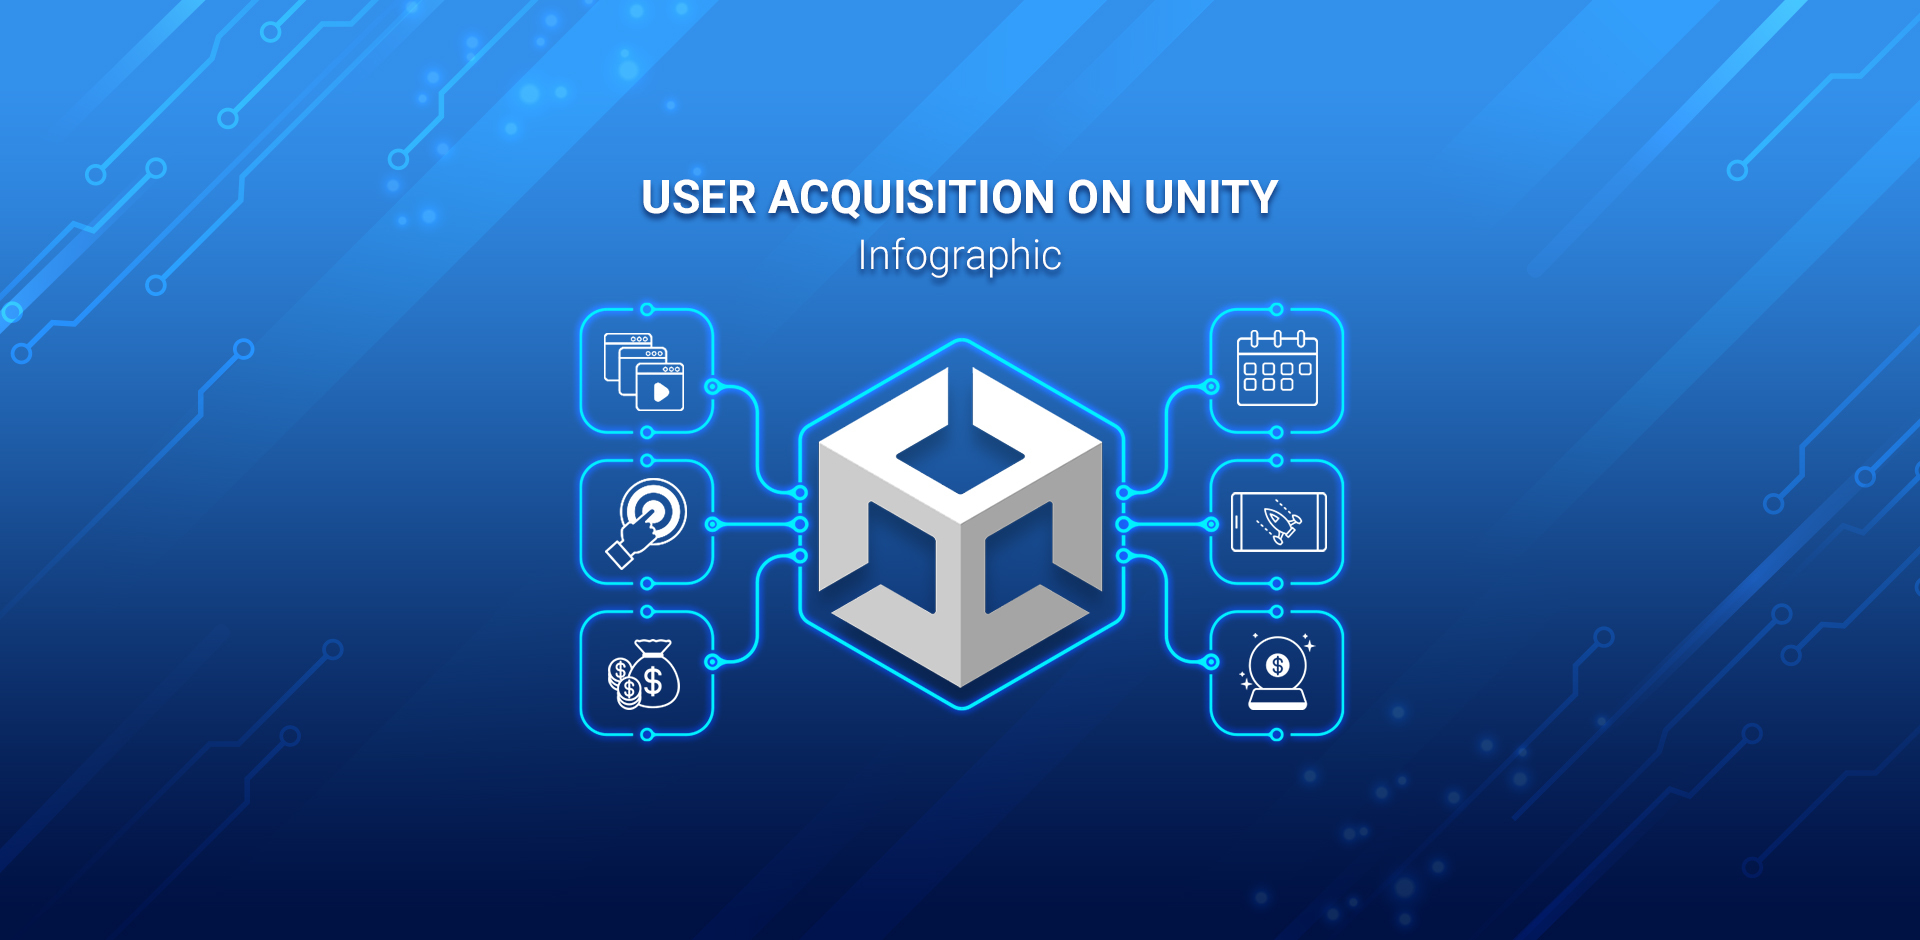 User Acquisition on Unity [Infographic]